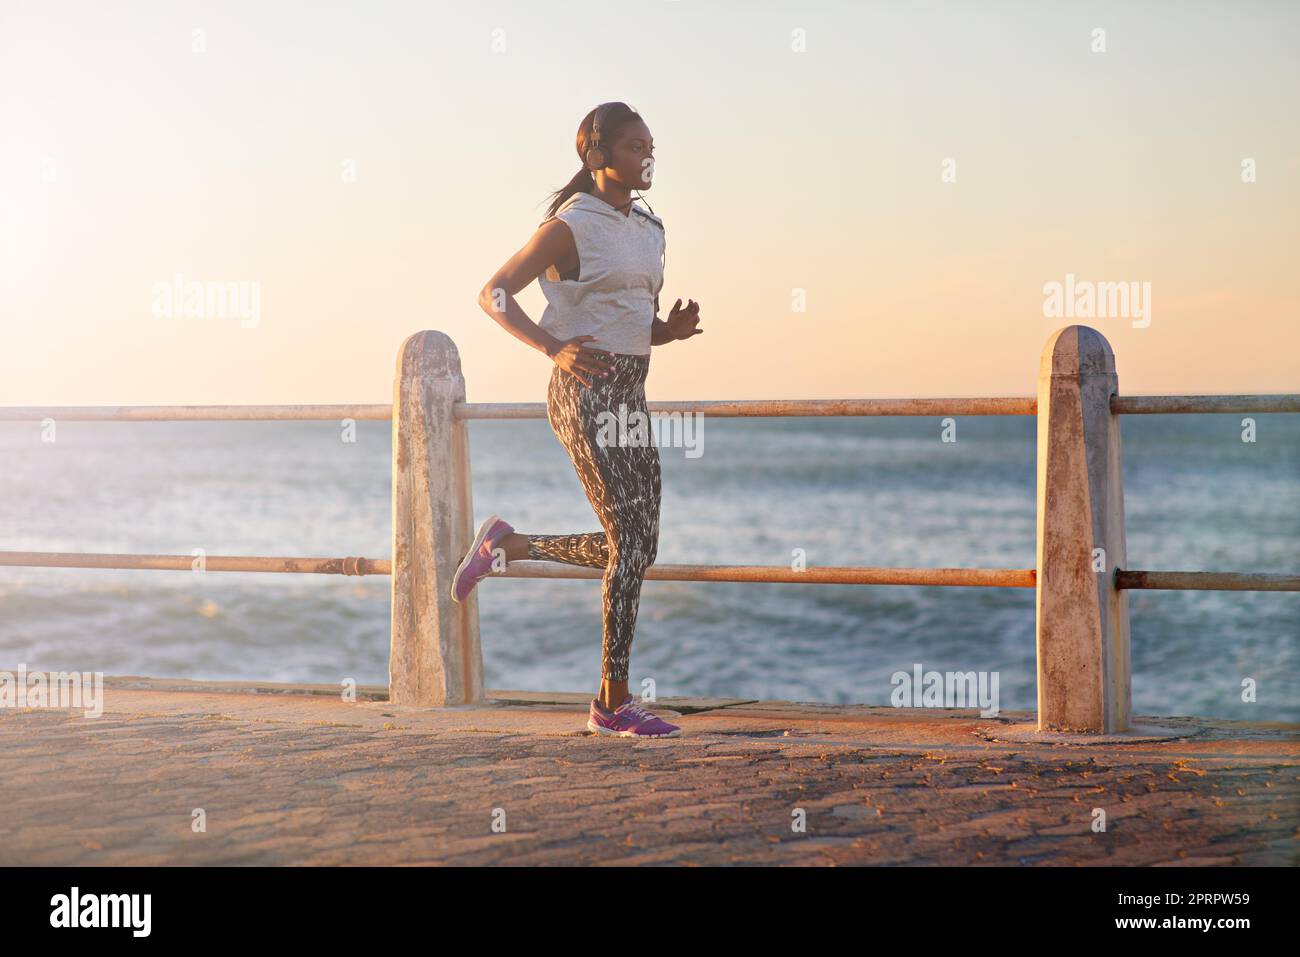 Running with determination. A young woman running along the promenade at sunset. Stock Photo